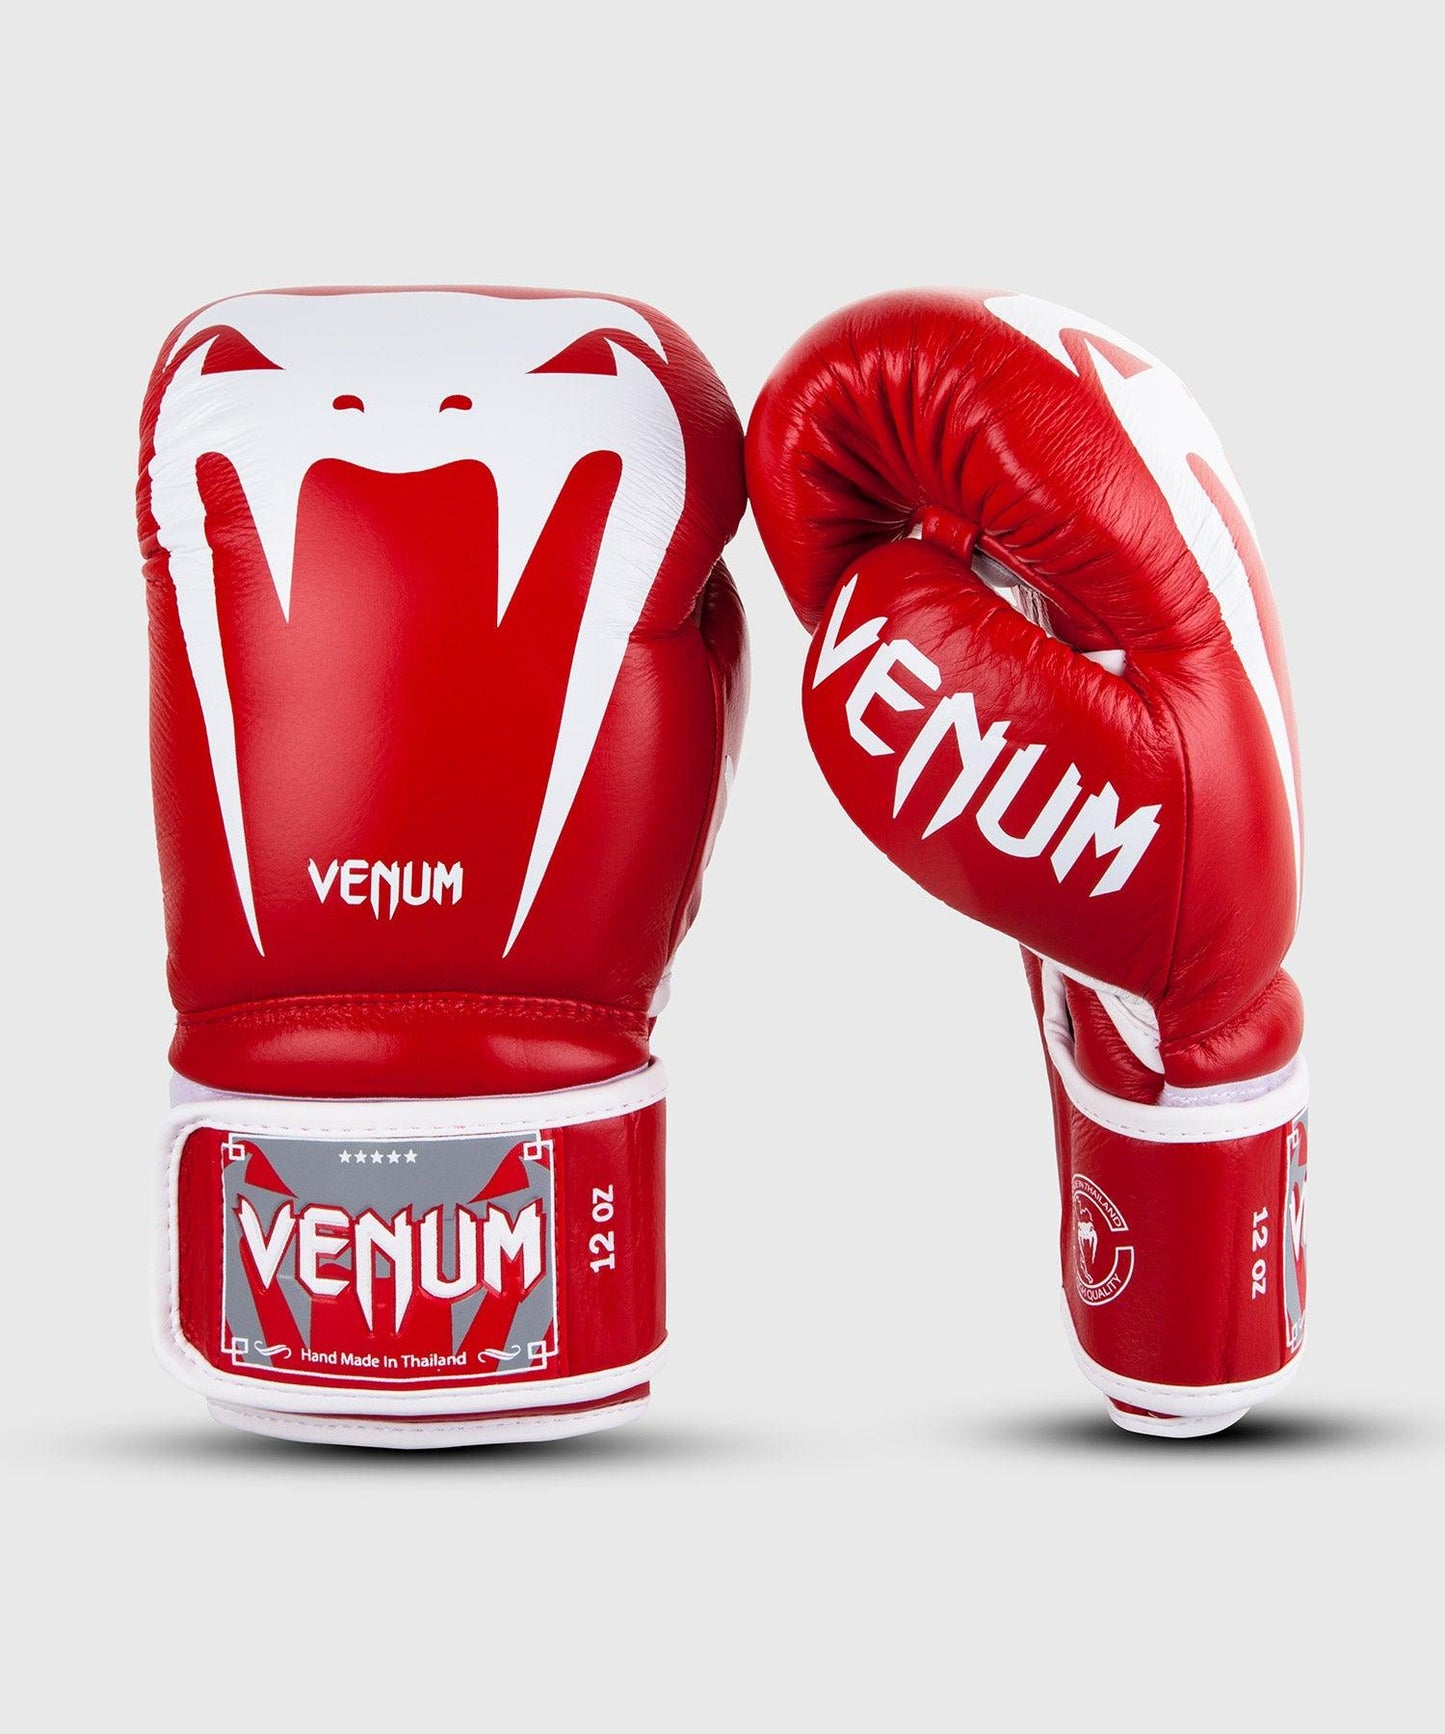 Venum Giant 3.0 Boxing Gloves - Nappa Leather - Red Picture 1